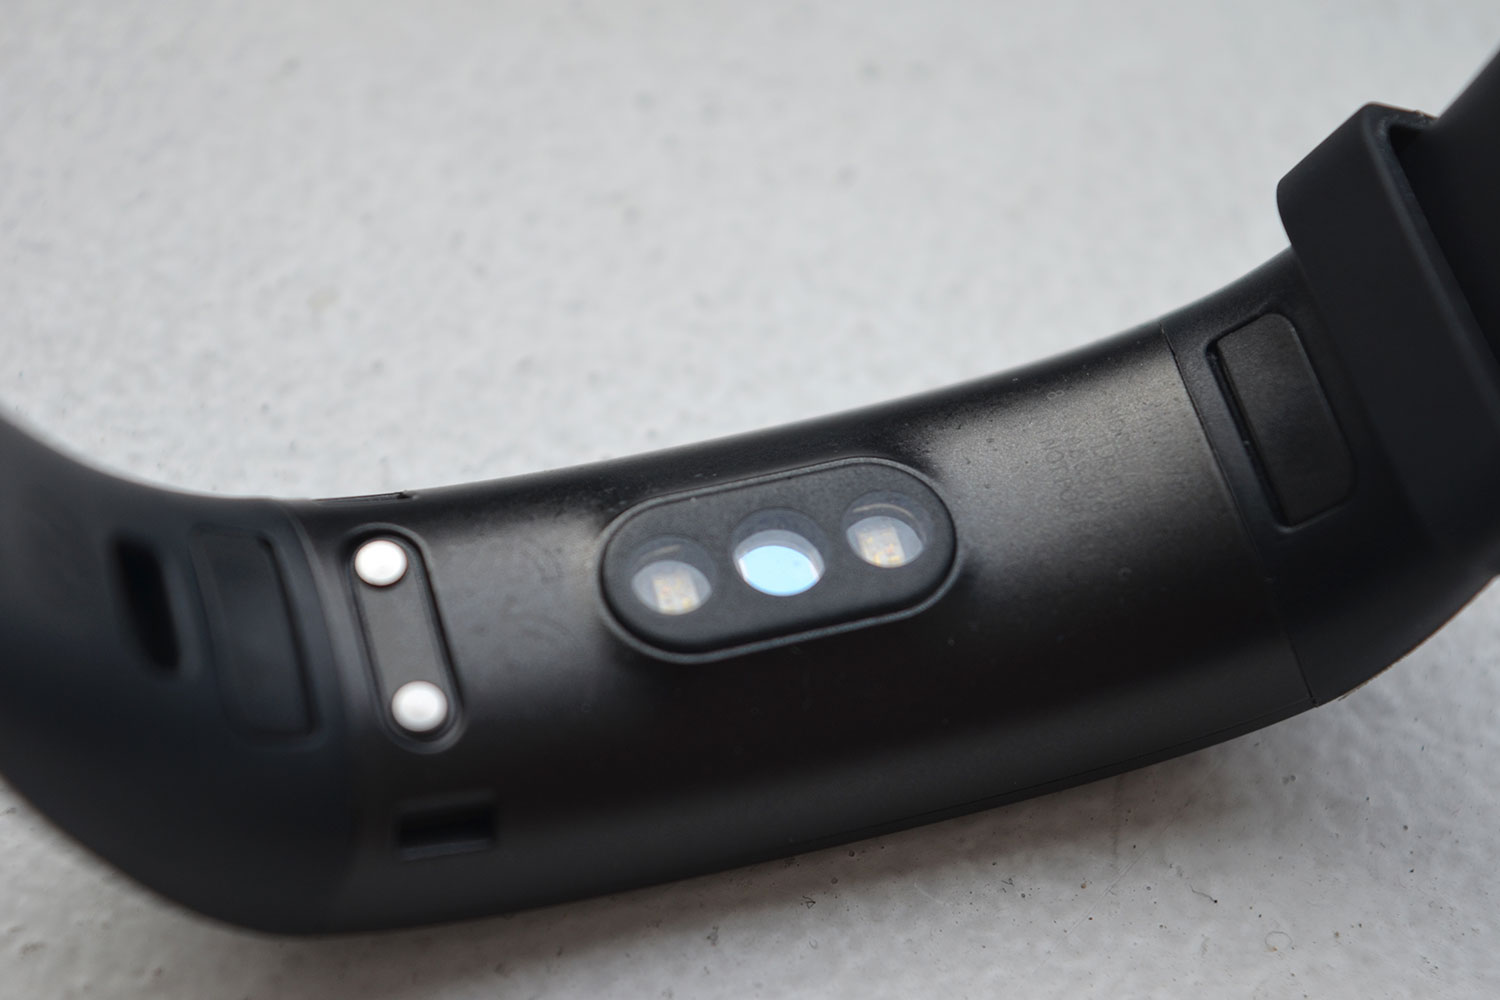 revision huawei band 3 pro review 4